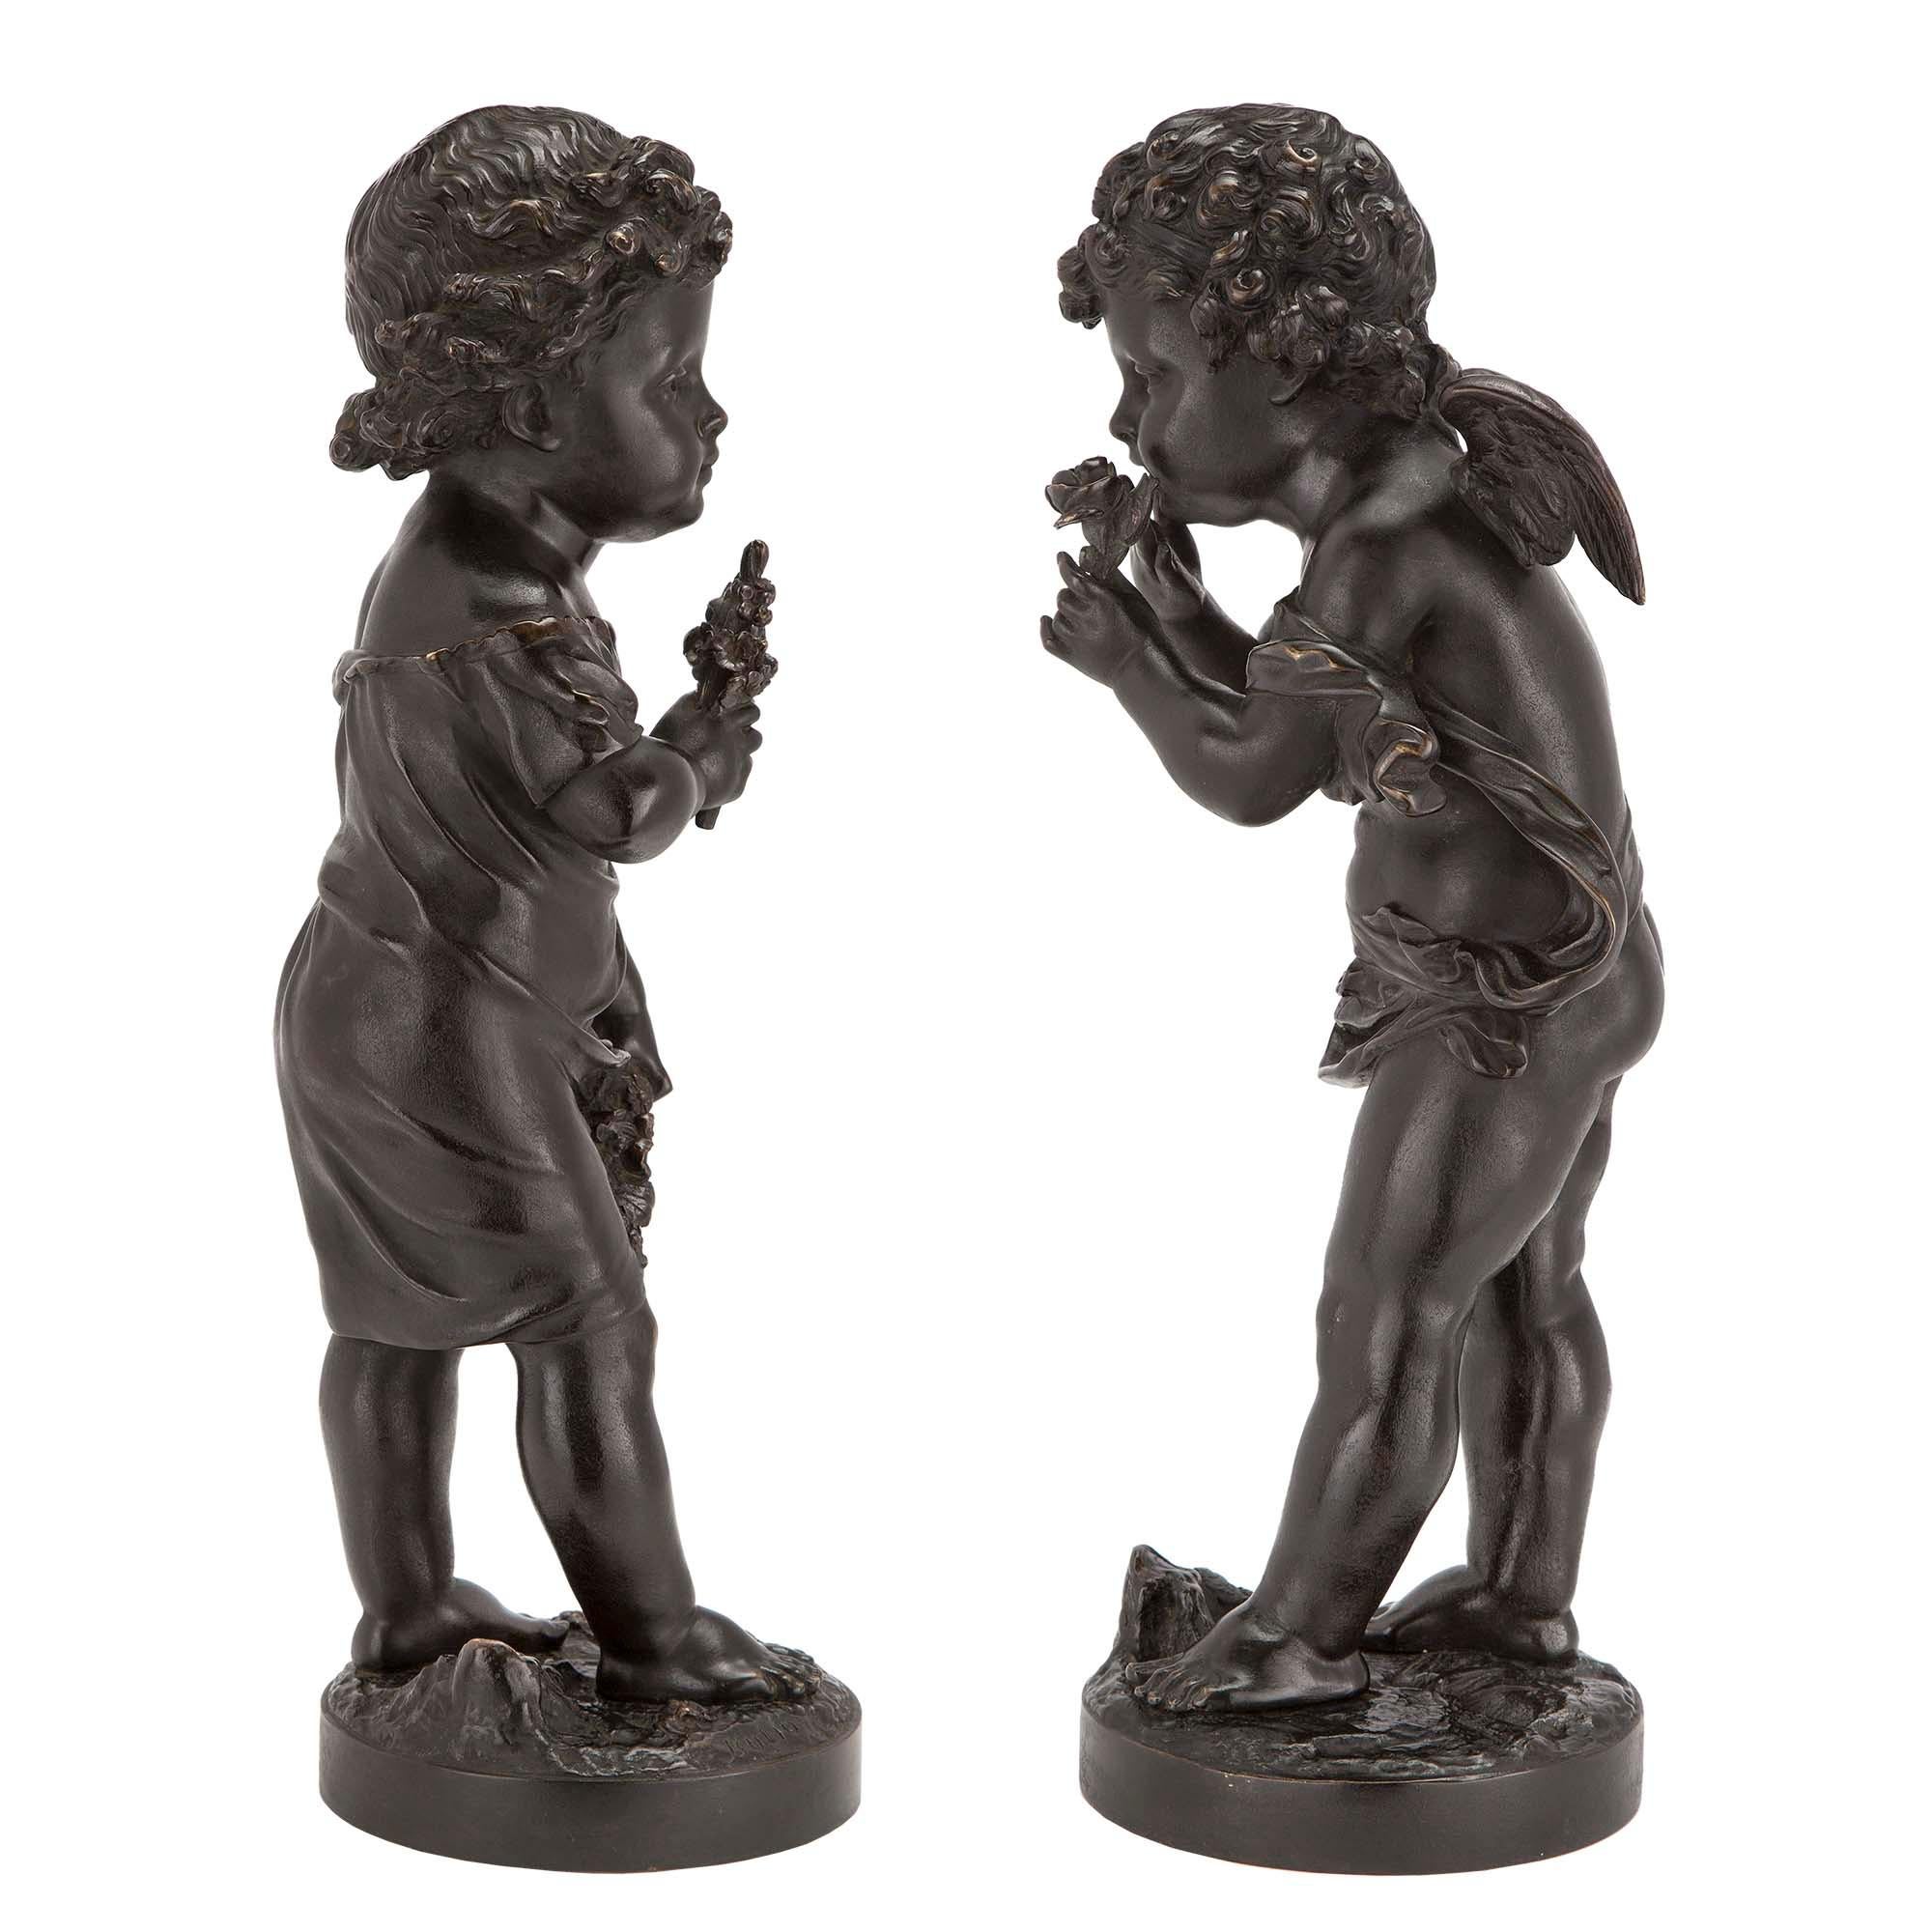 A wonderful and very decorative pair of French 19th century patinated bronzes, signed Bulio. Each is raised on a circular base depicting the ground. One bronze is of an adorable winged cupid holding a bunch of wildflowers. The other is of a precious